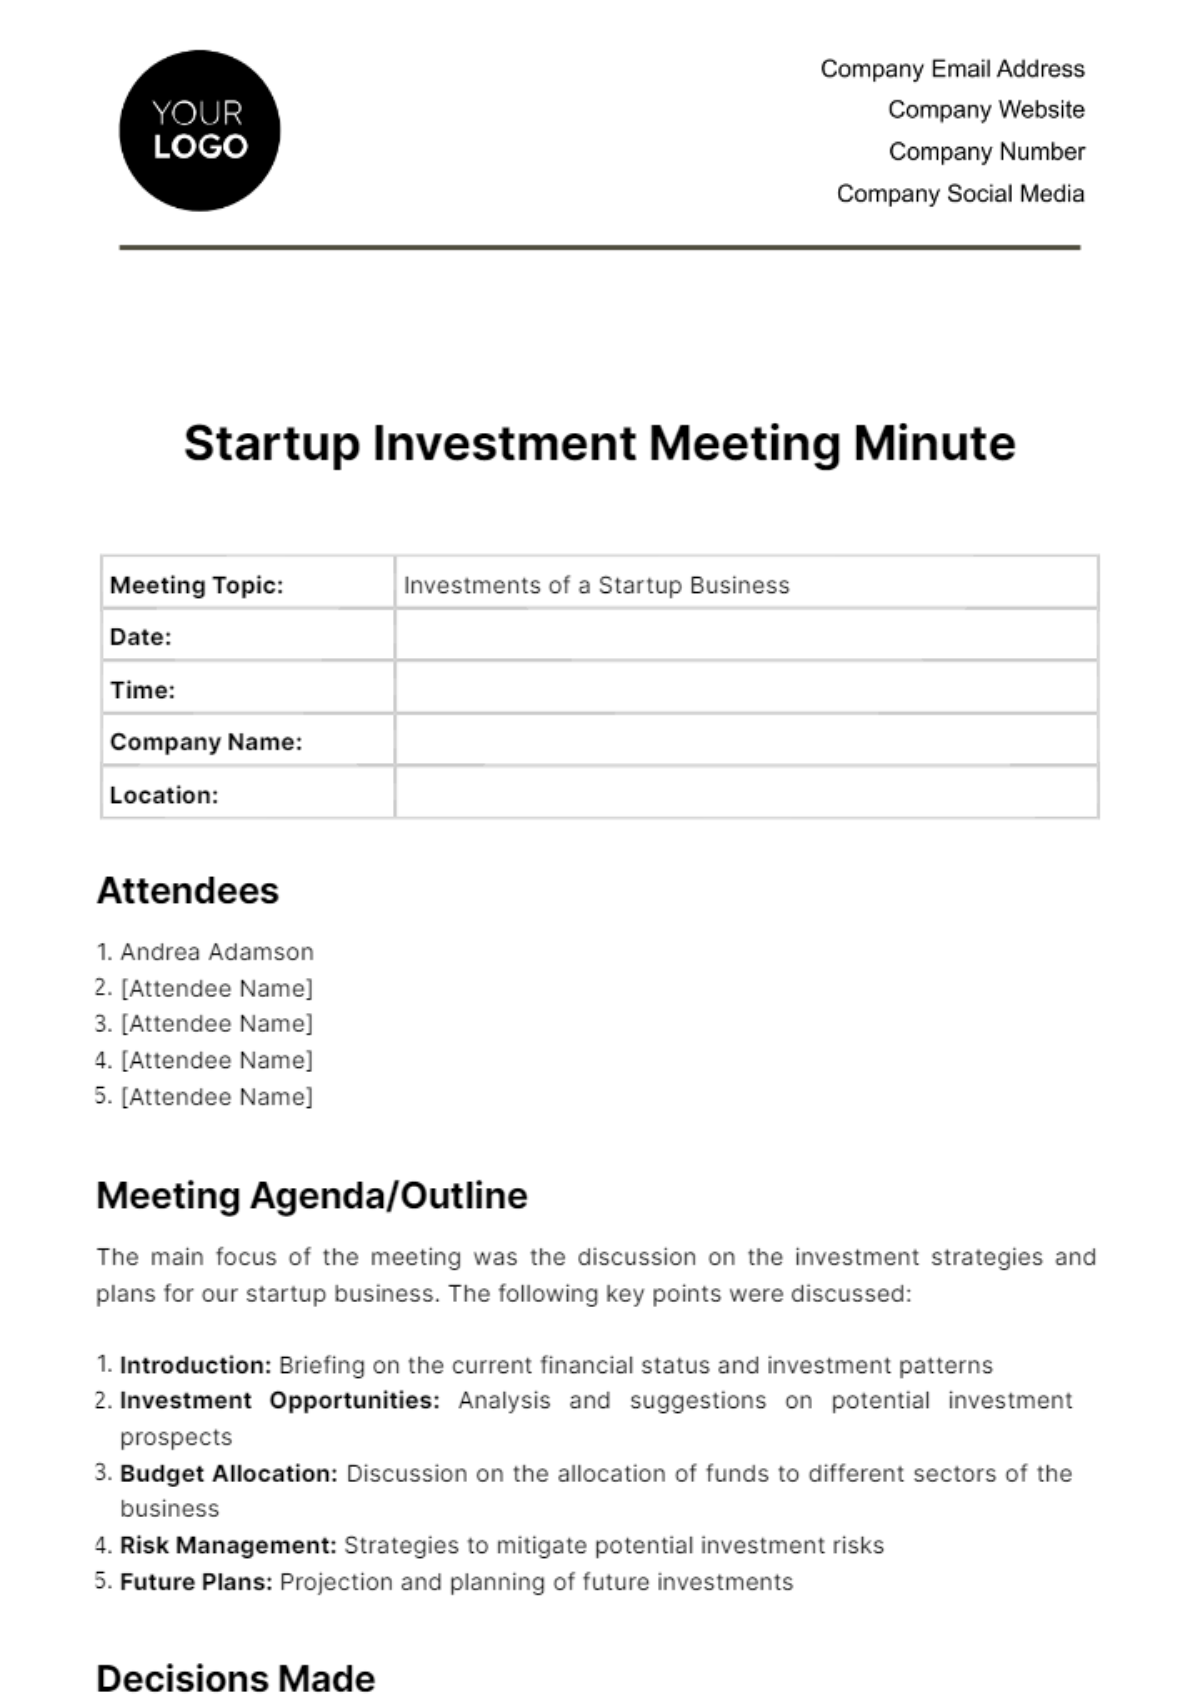 Startup Investment Meeting Minute Template